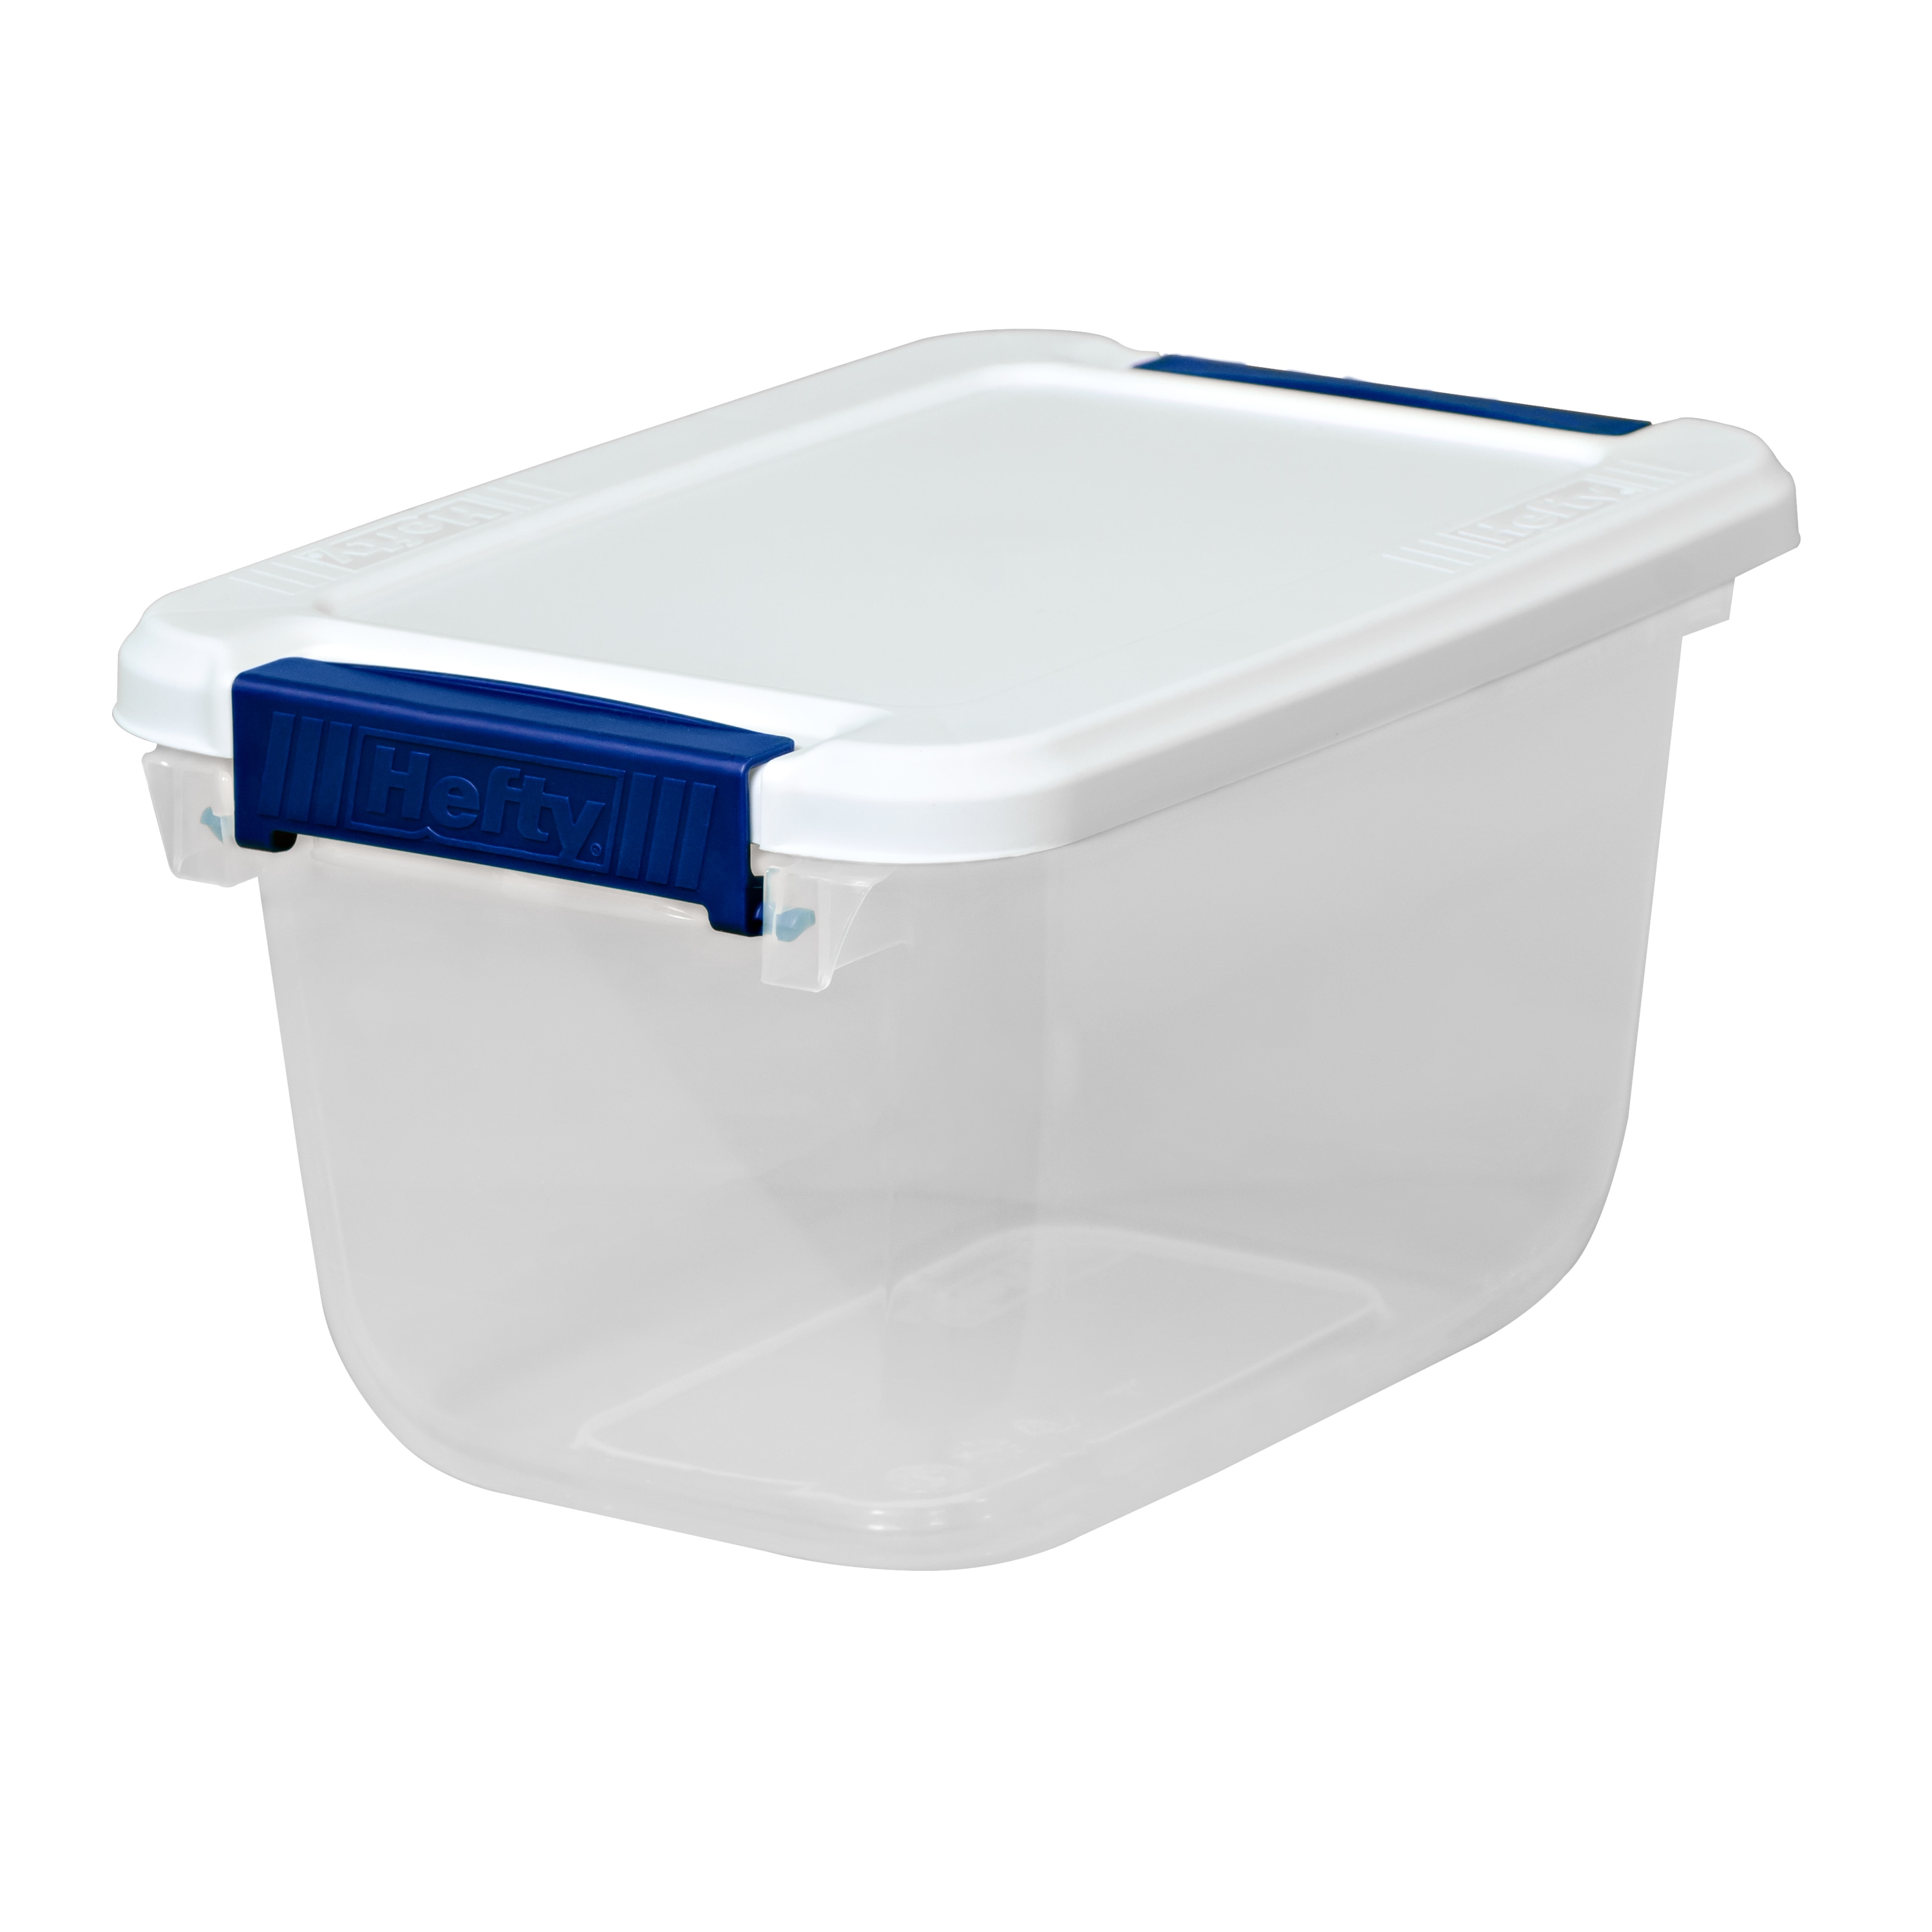 Hefty Clear Plastic Bin with Smoke Blue Lid (8 Pack) - 6.5 qt Storage Container with Lid, Ideal Space Saver for Closet Shoe Storage Bins and Under